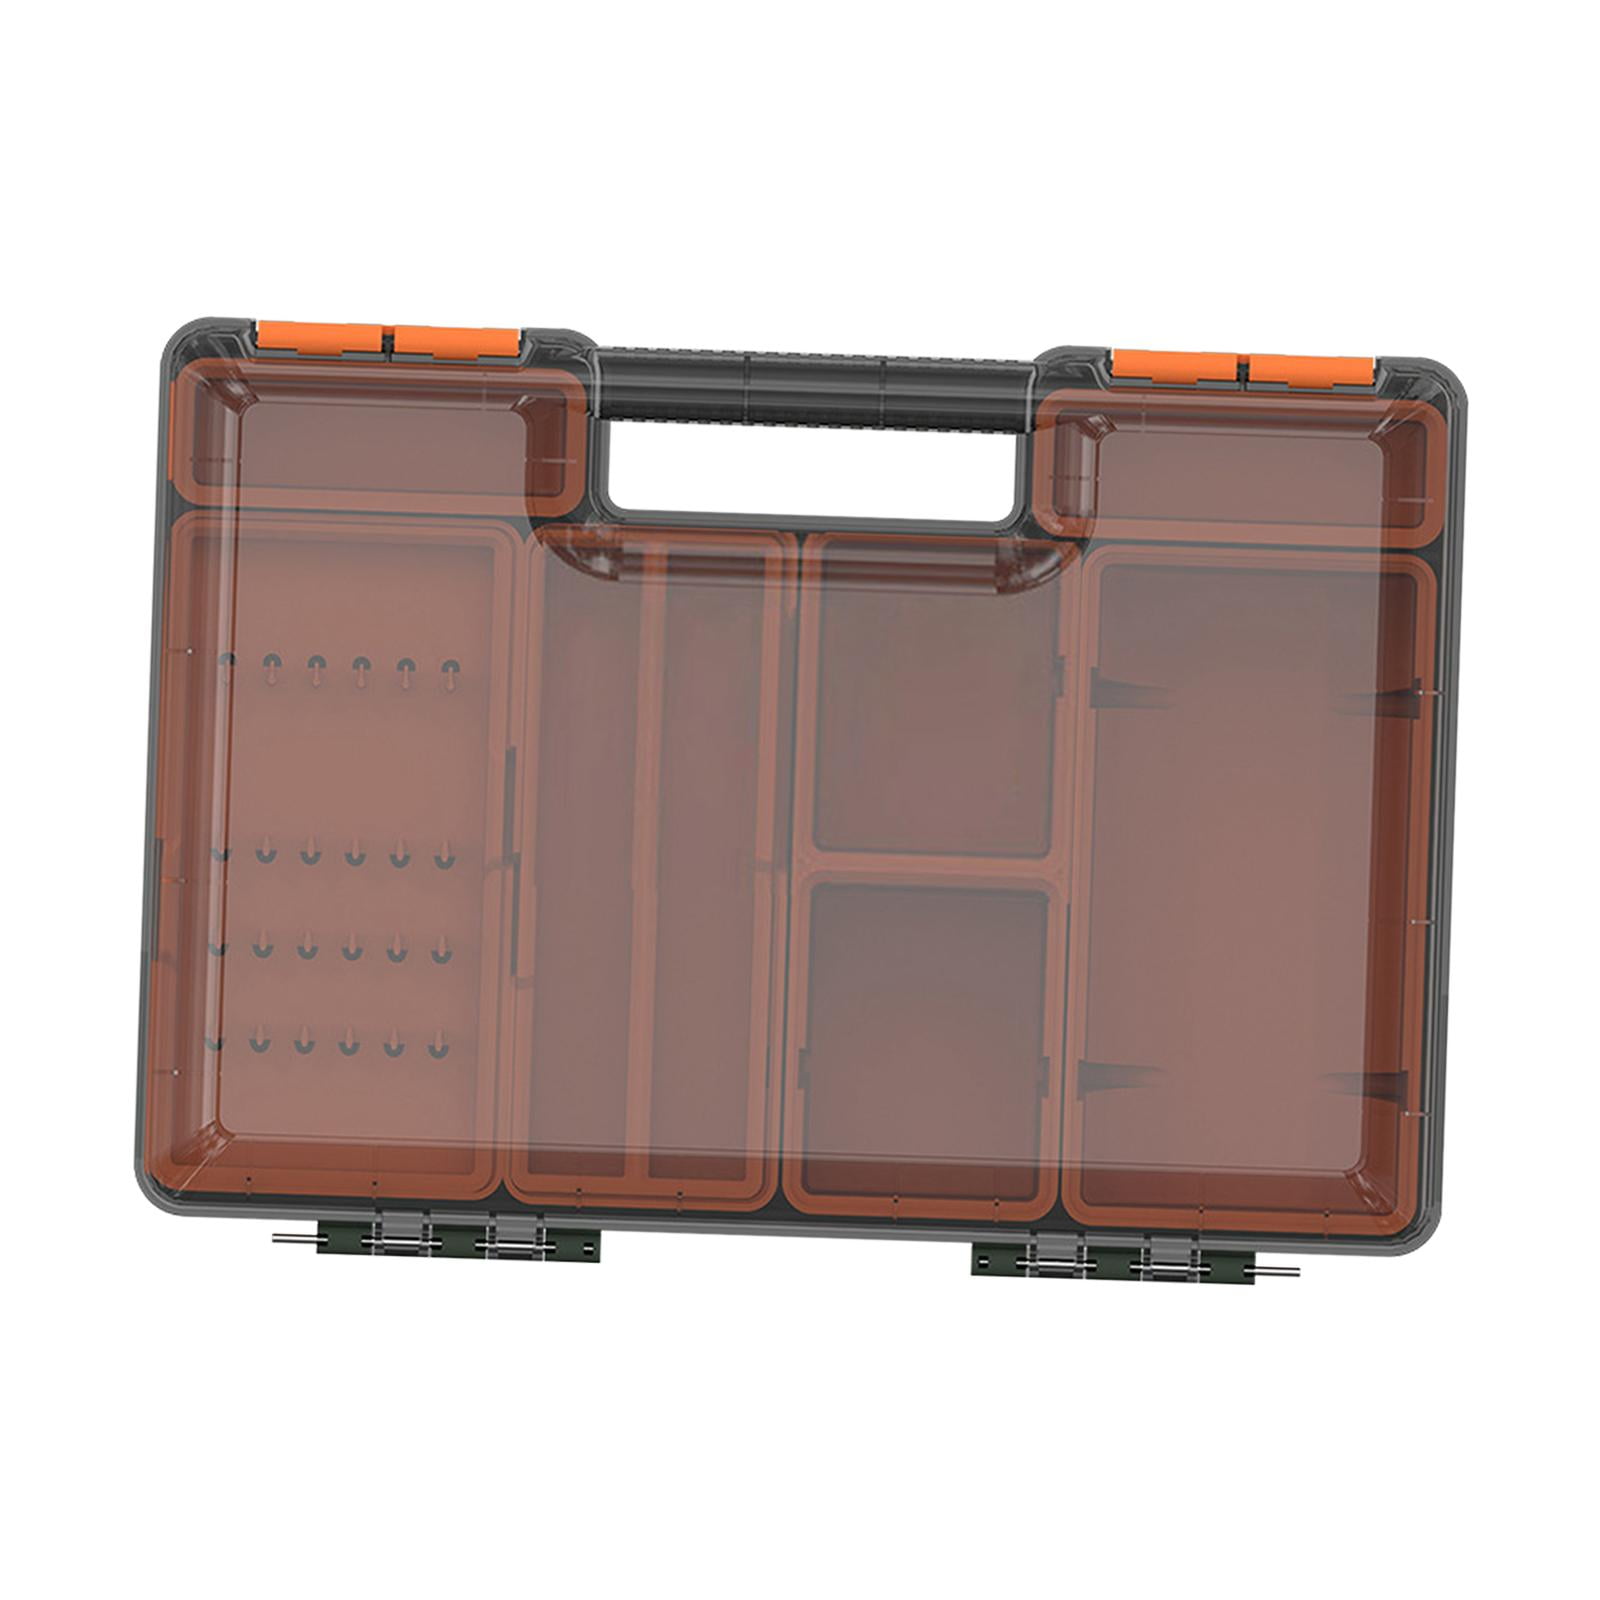 Fishing Tackle Box Storage Case Large Utility Boxes Container Fishing  Accessories Fishing Lures Box Organizer for Freshwater, Fly Fishing Orange